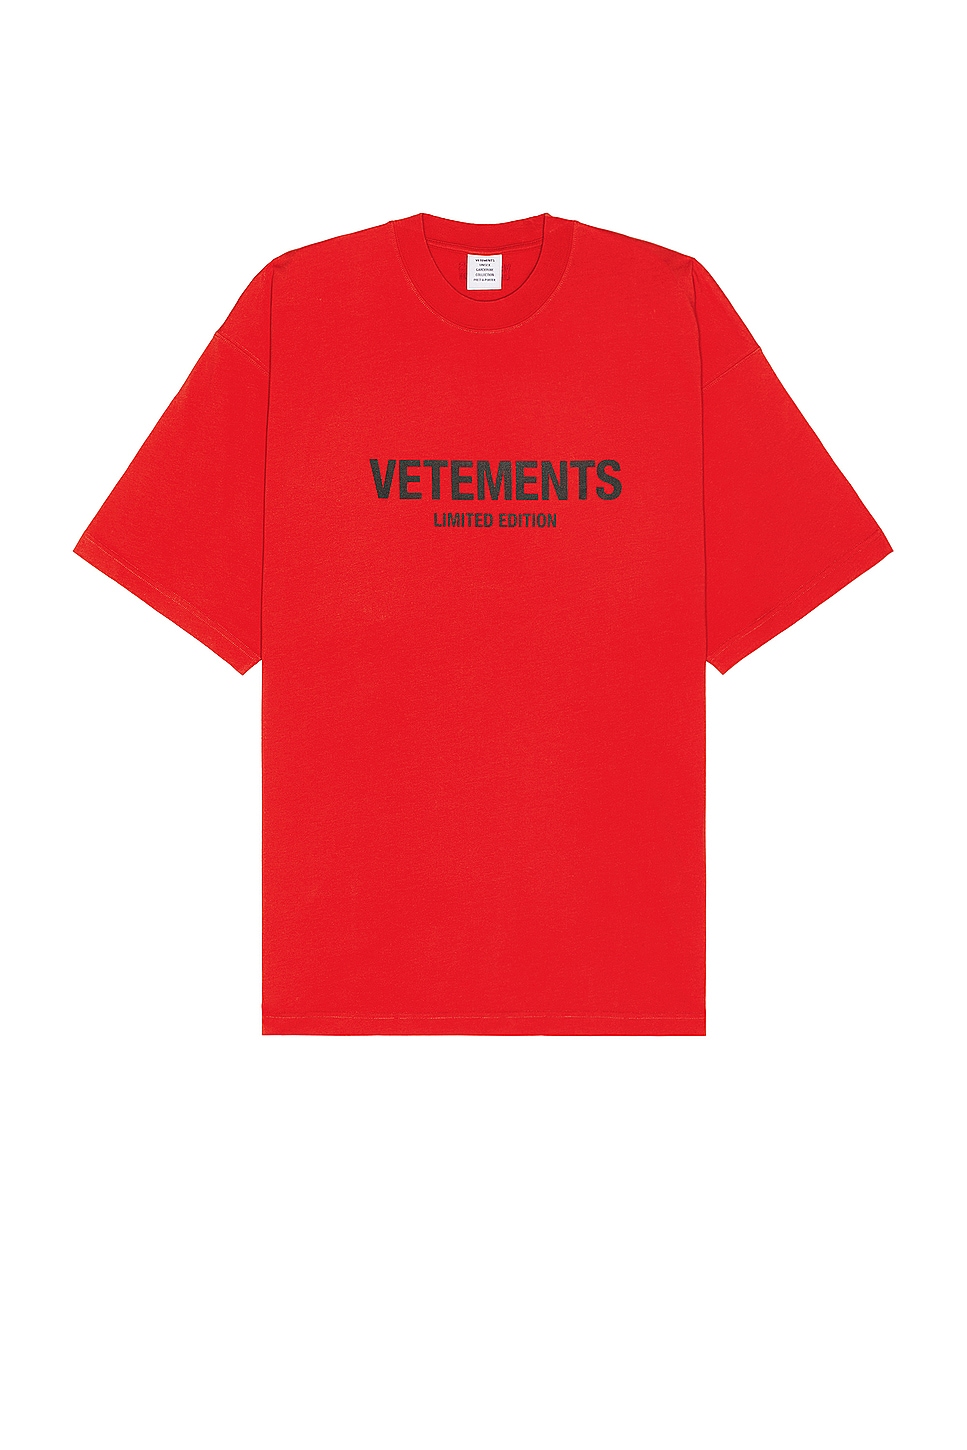 Image 1 of VETEMENTS Limited Edition Logo T-shirt in Red & Black